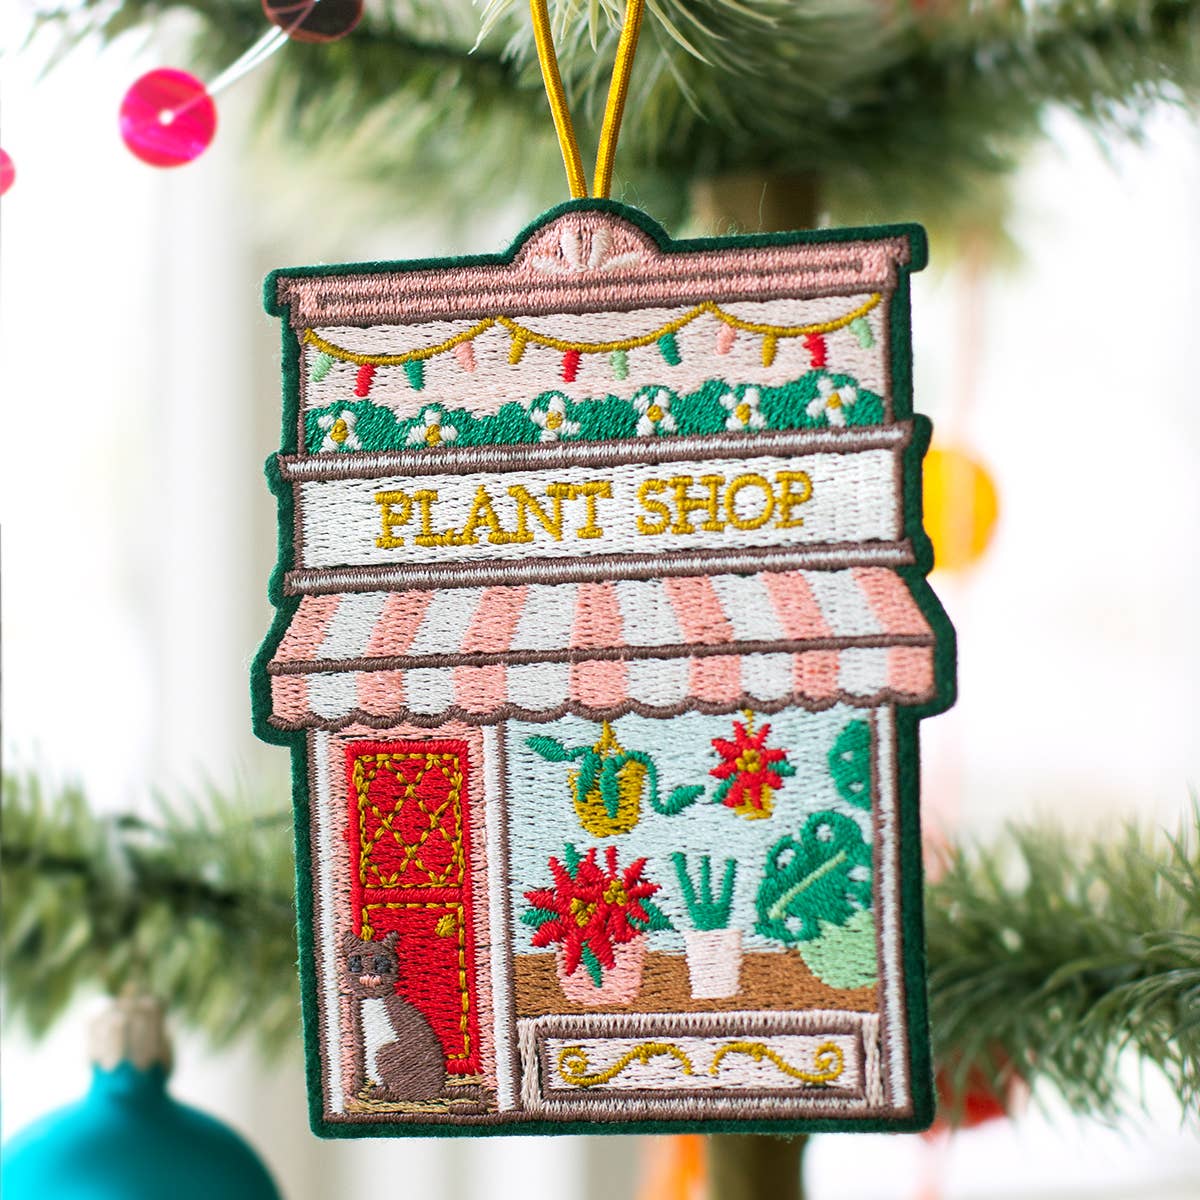 Embroidered Ornament; Plant Shop